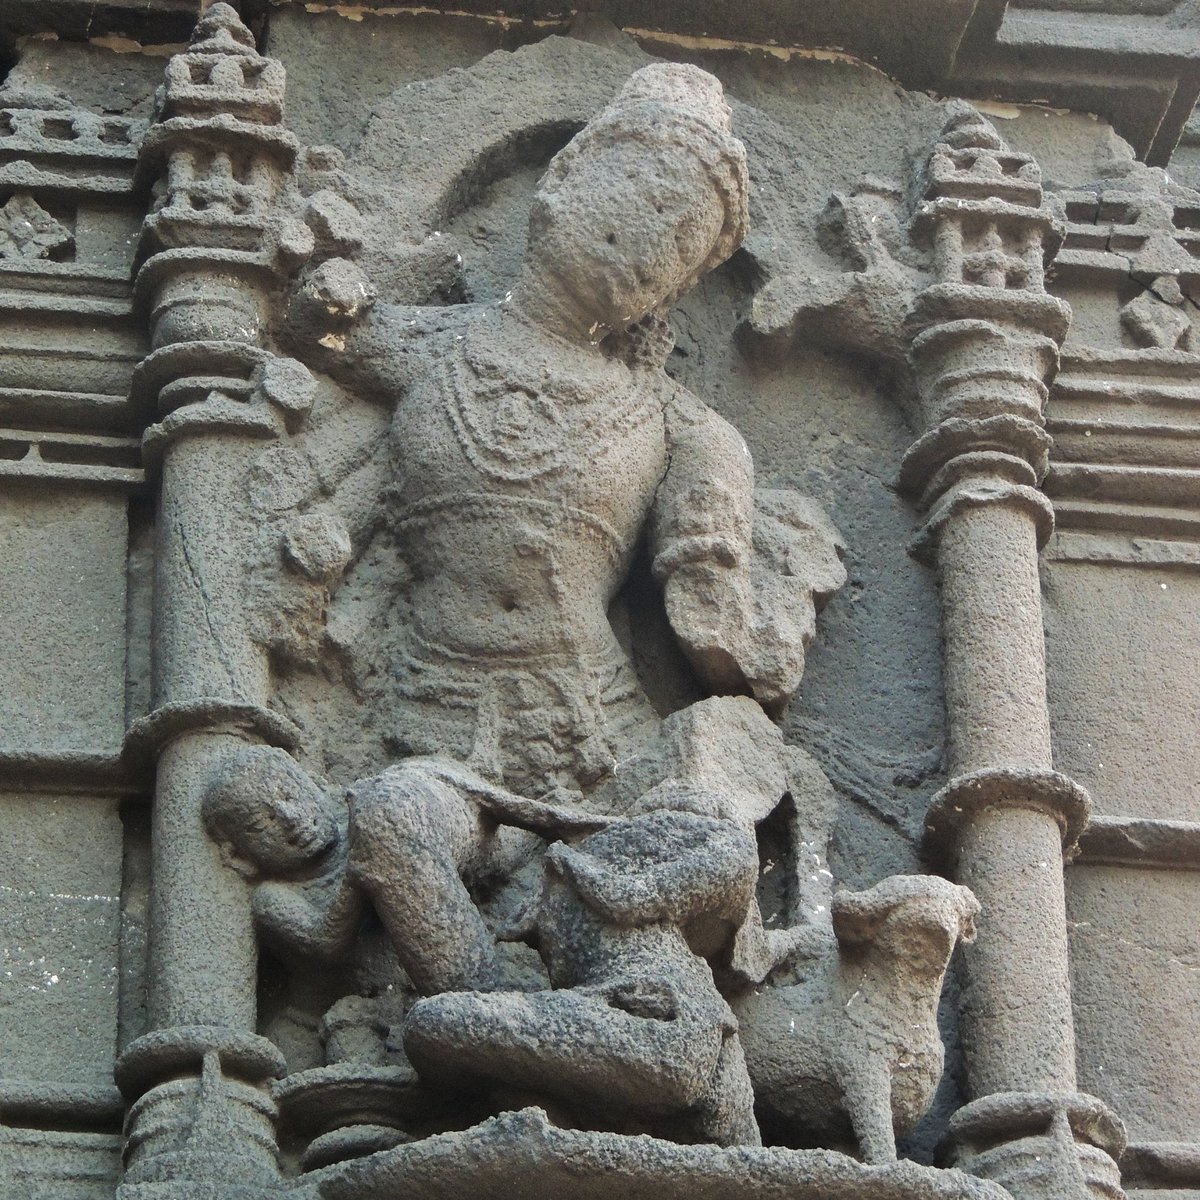 अं for अंबरनाथ शिवालय Ambernath Shiva Temple. Yamantaka - Shiva protecting young Markandeya from Yama. Yama is mutilated, but his vahana, the water buffalo is visible. Note young Markandeya peeping behind the lingam from which Shiva has emerged.  #AksharArt  #ArtByTheLetter (4/10)